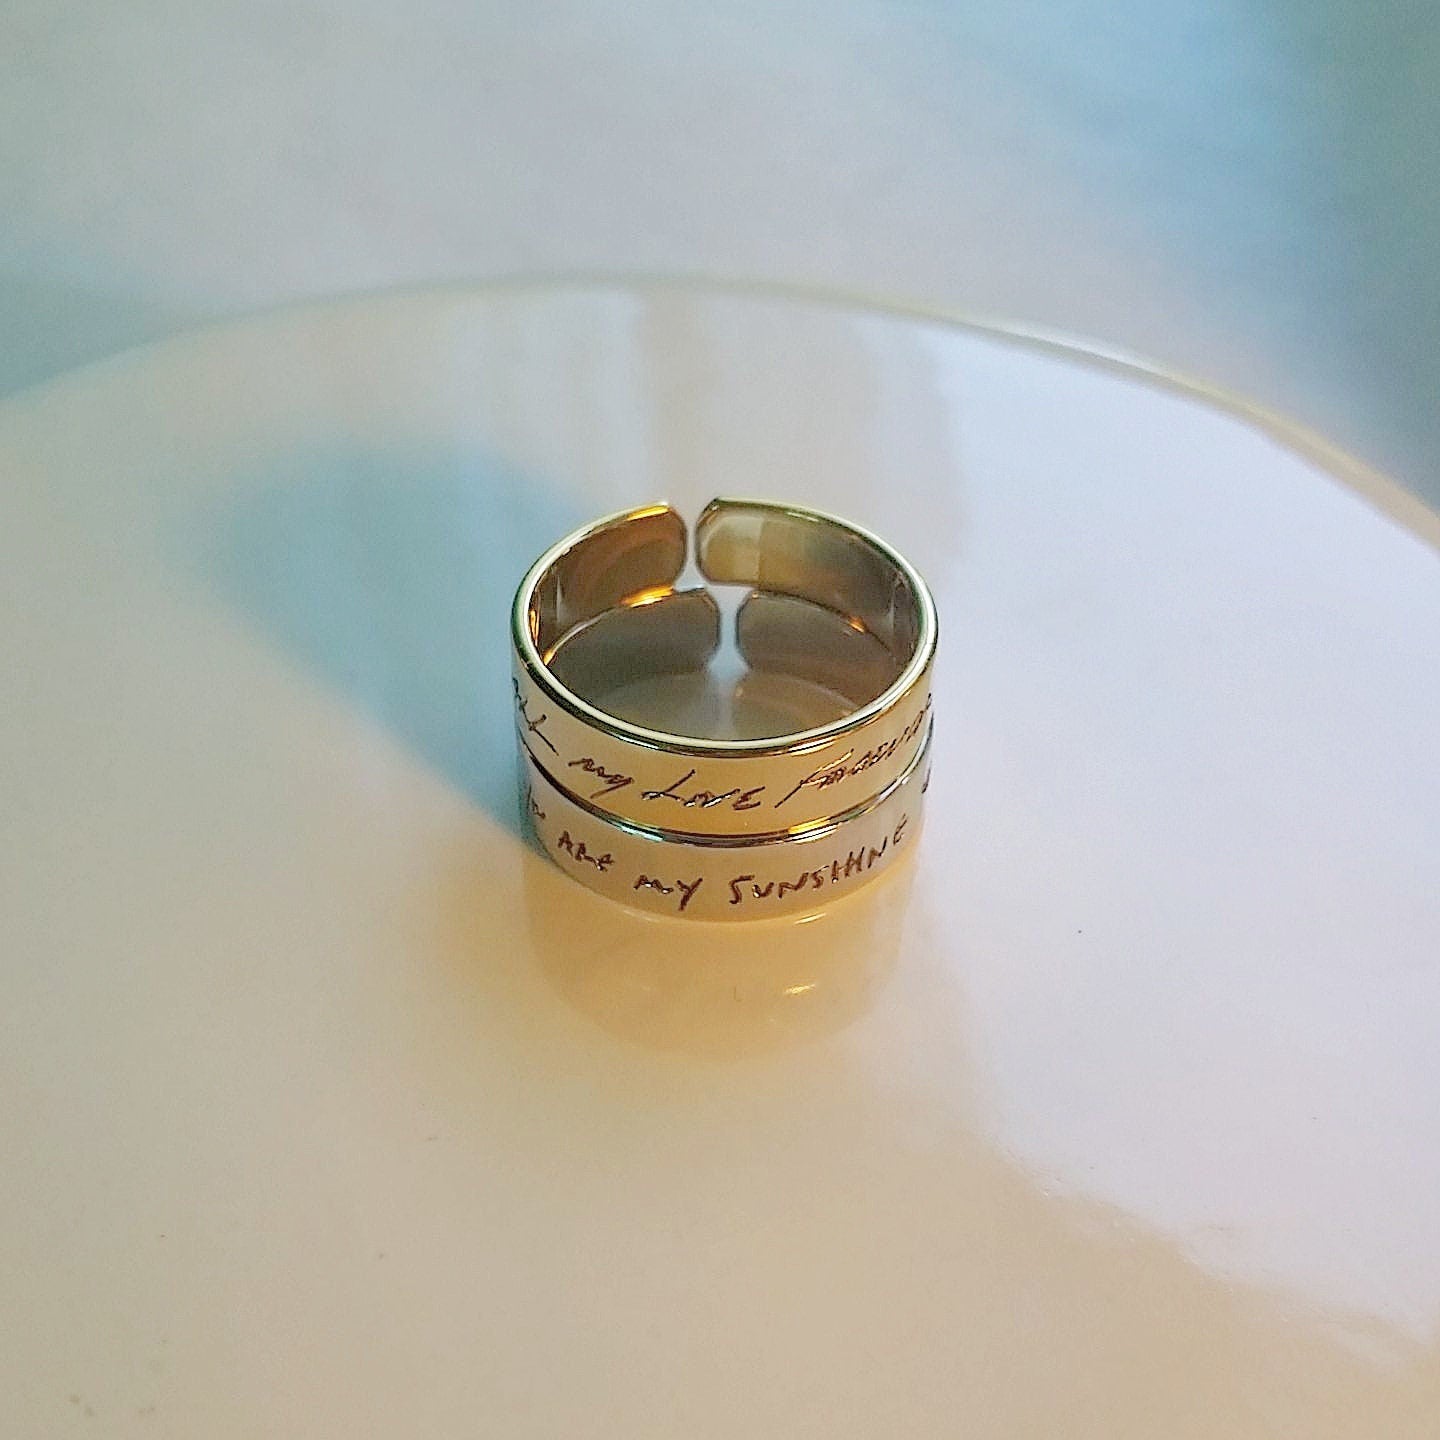 Handwriting engraved on silver ring band, stackable and adjustable